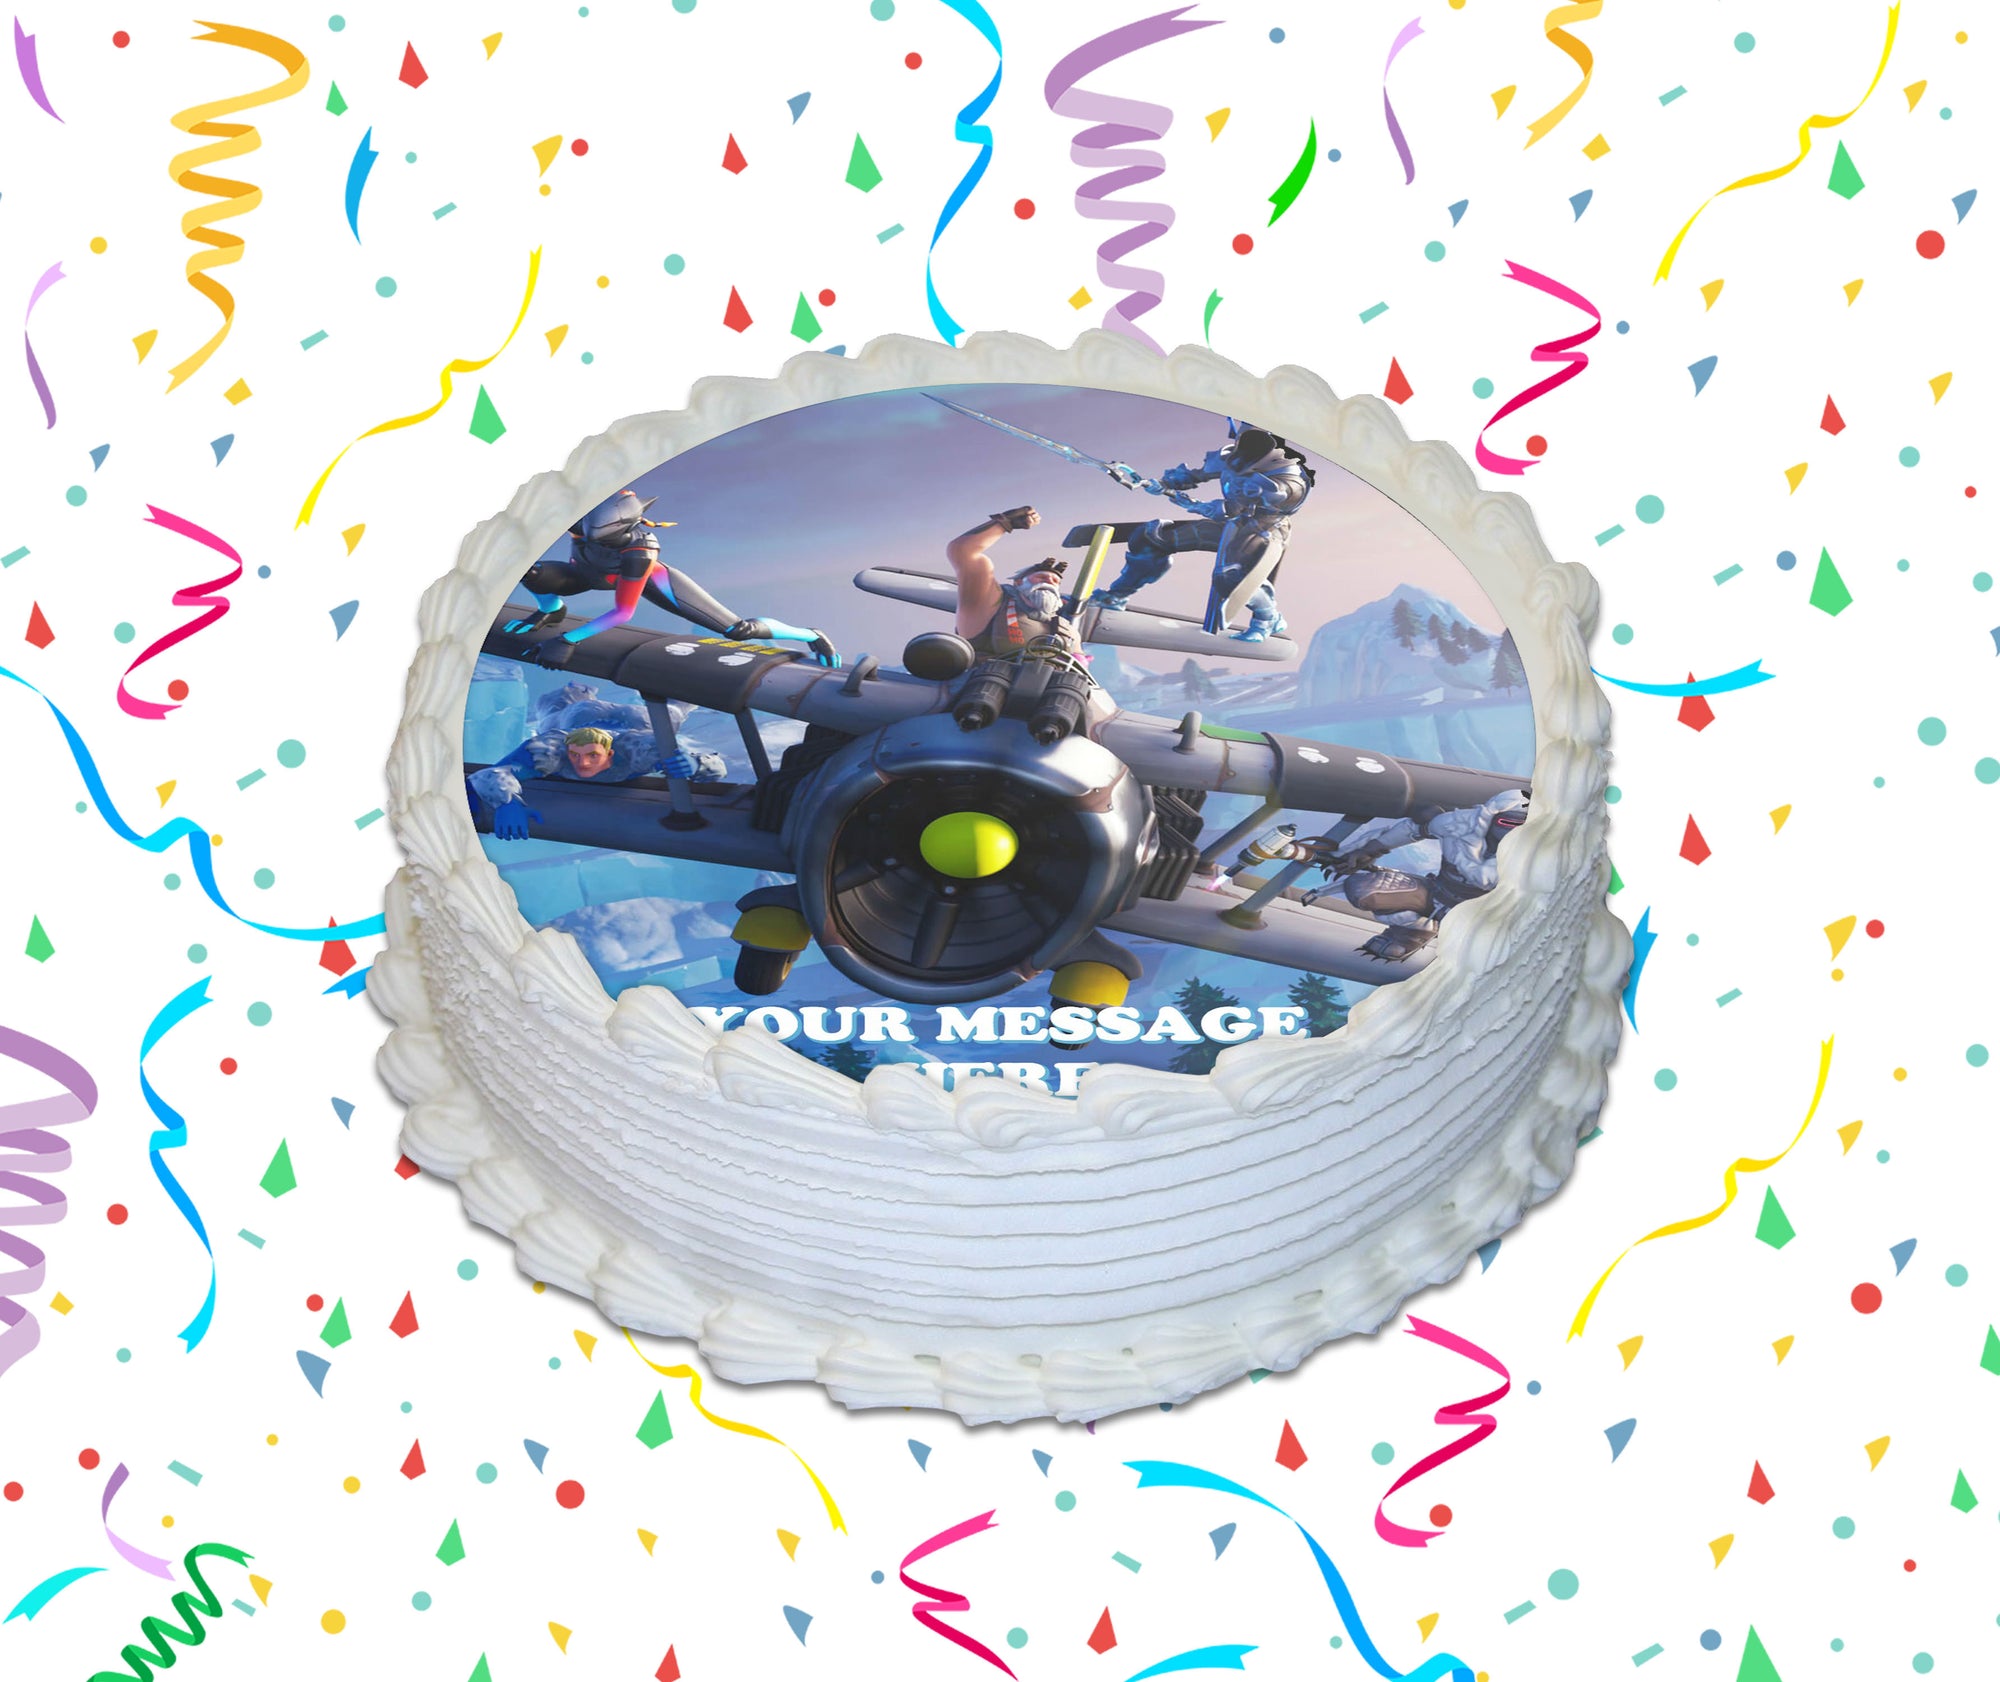 Fortnite Edible Image Cake Topper Personalized Birthday Sheet Decorati -  PartyCreationz